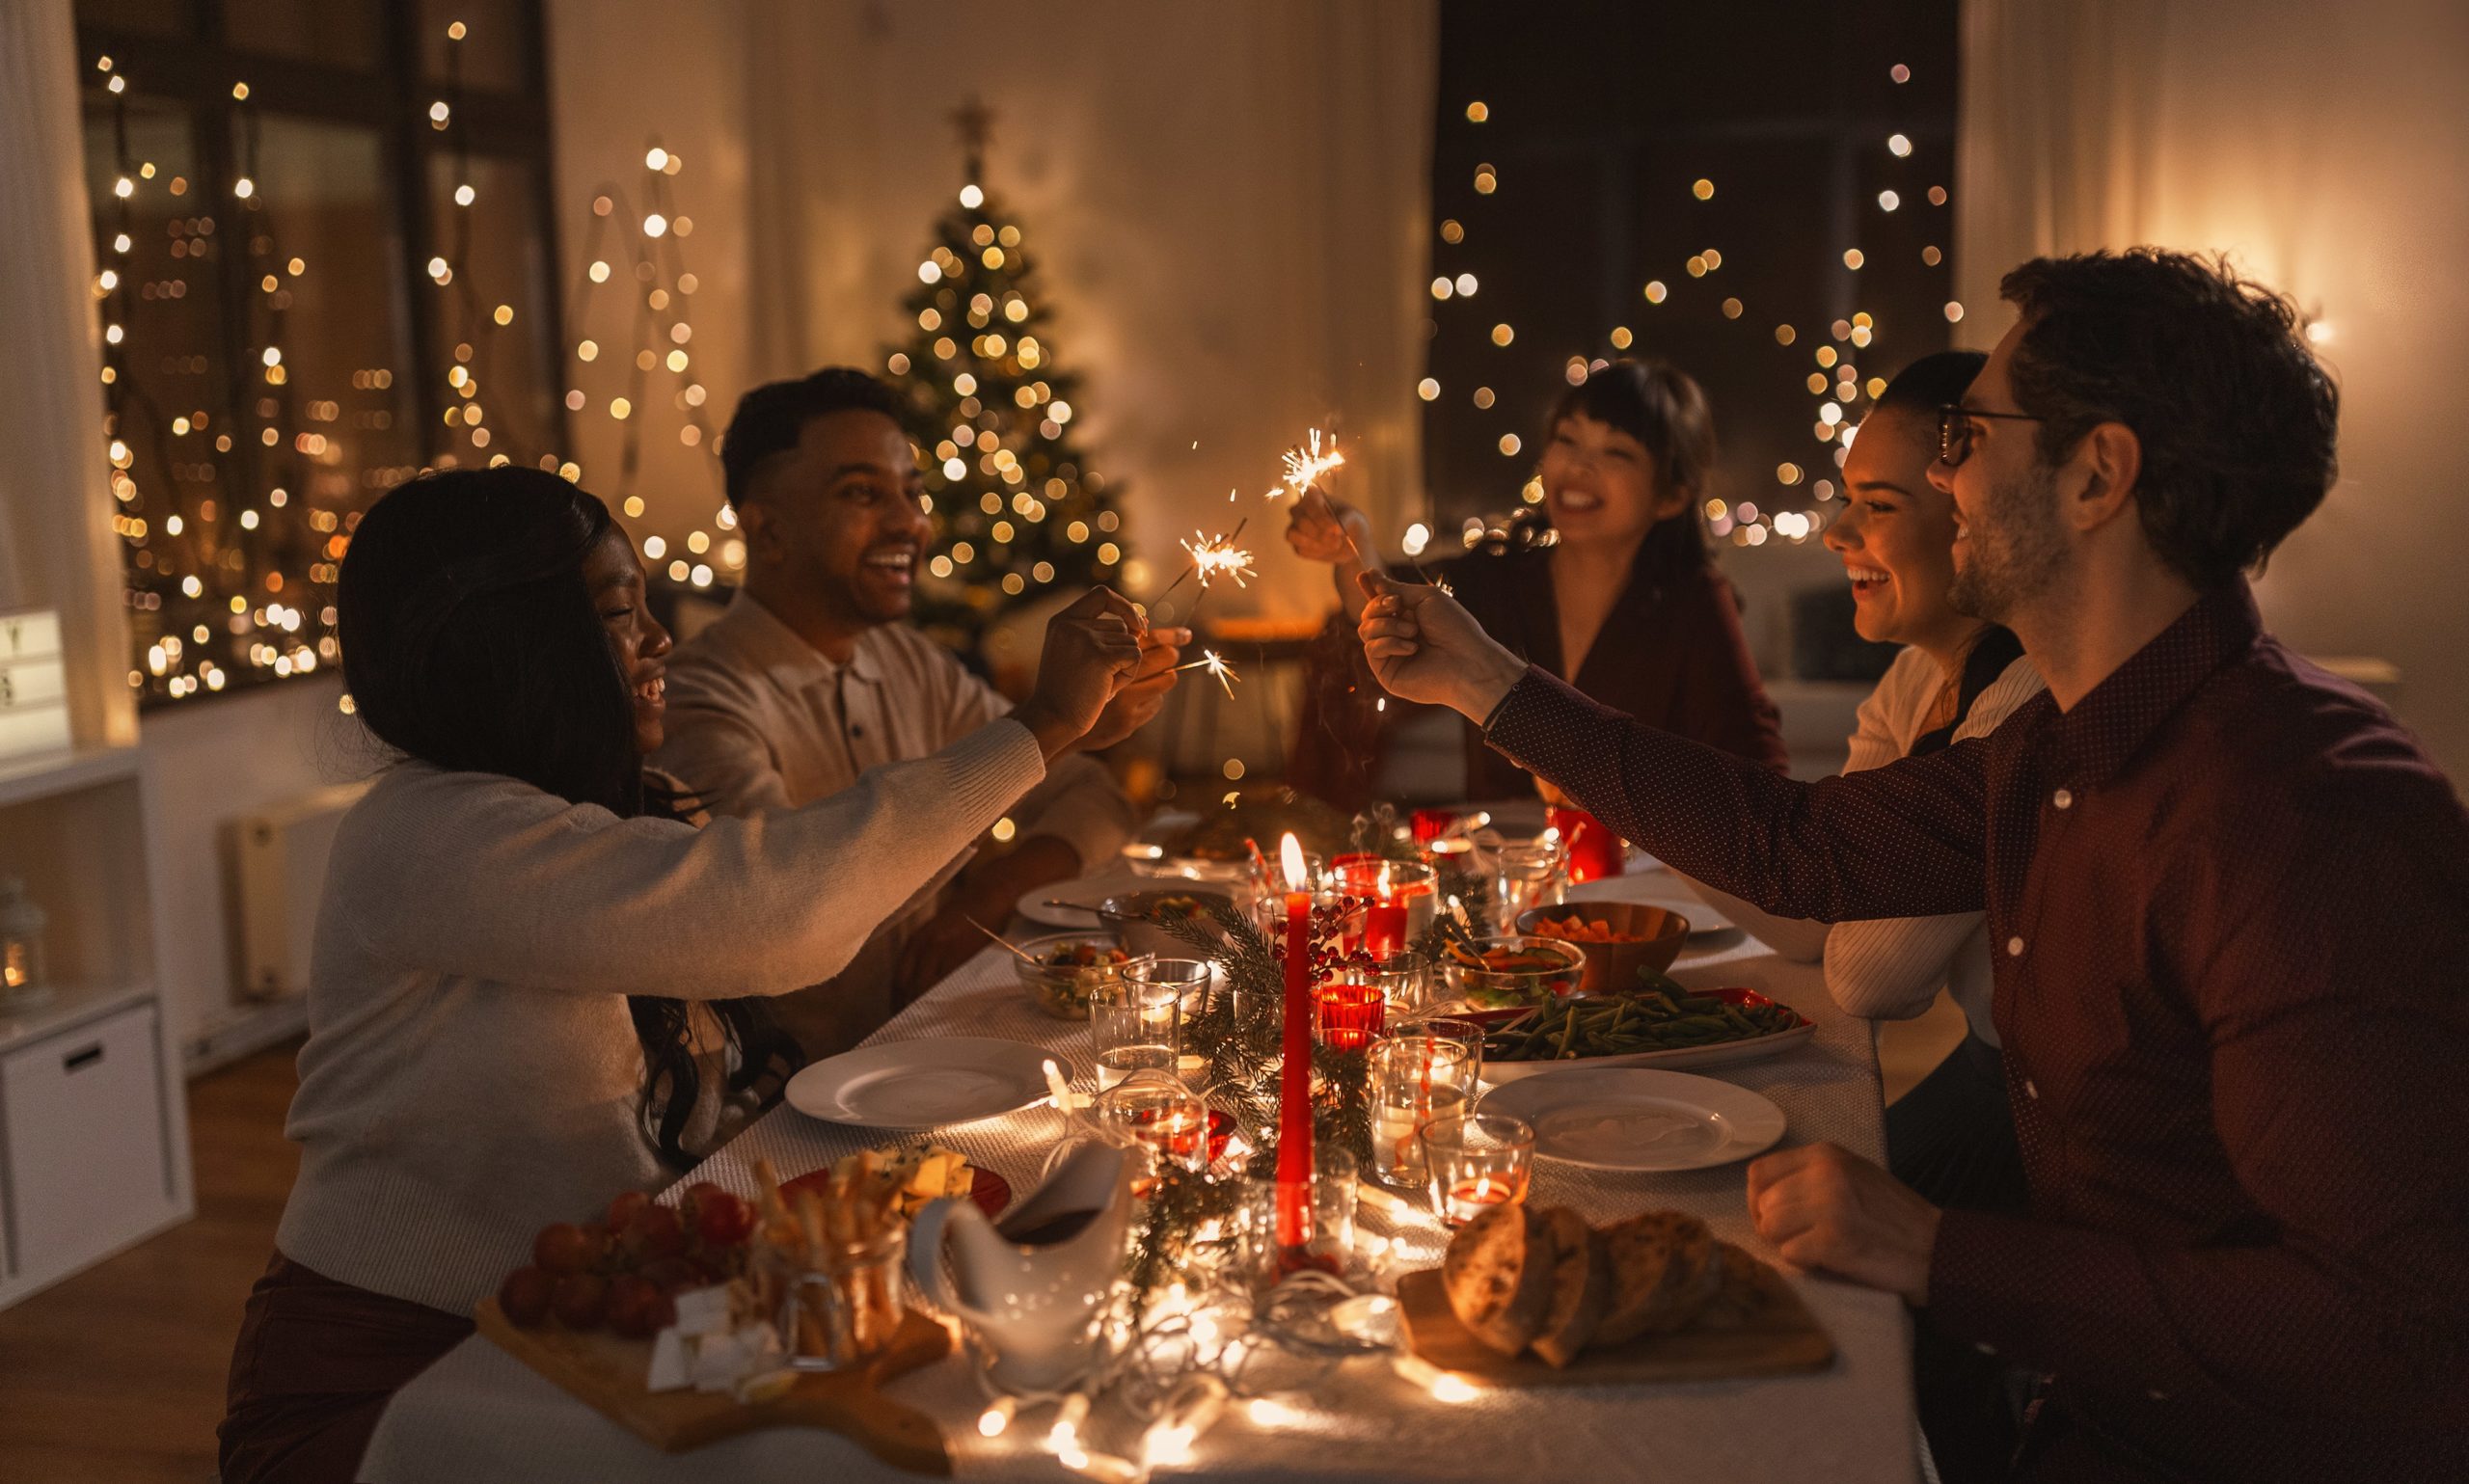 Hosting a Holiday Party in a Small Space: Tips to Save Your Sanity